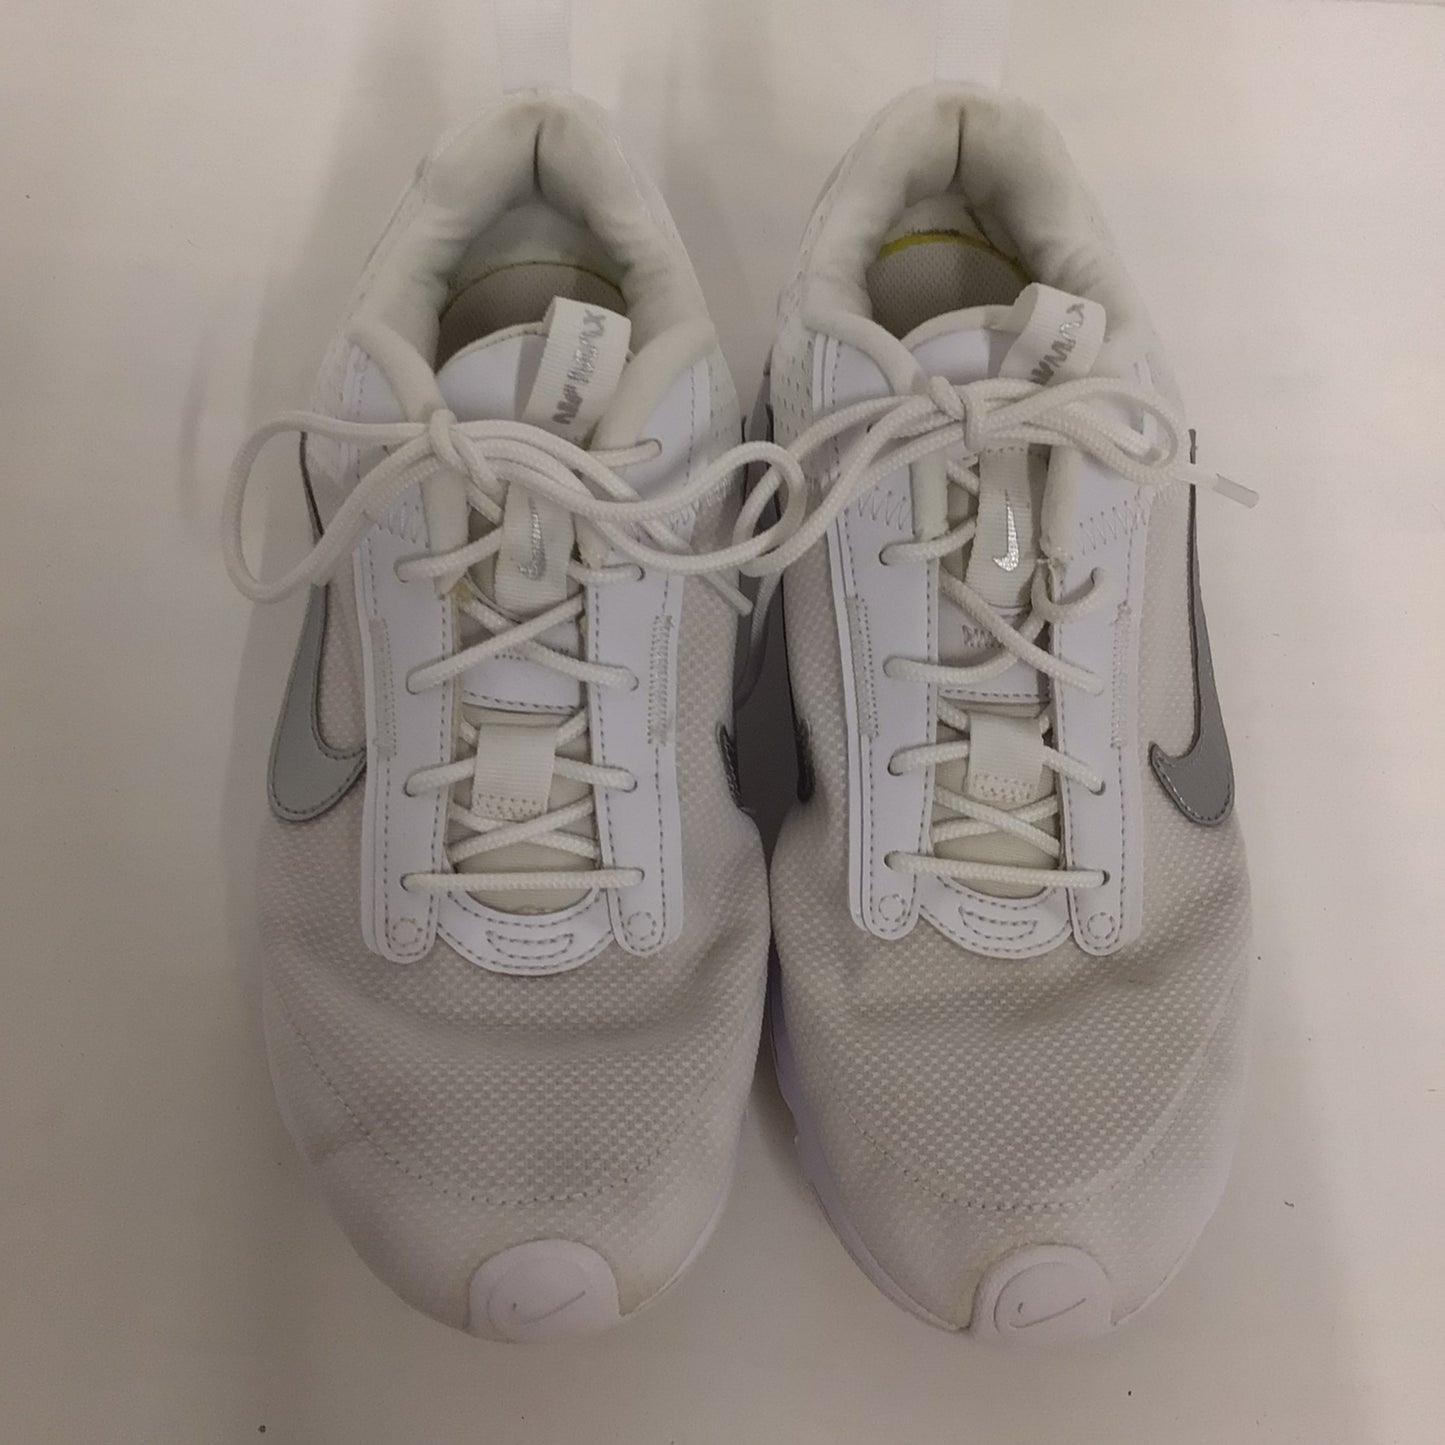 Nike Air Max White Trainers Size UK 6.5